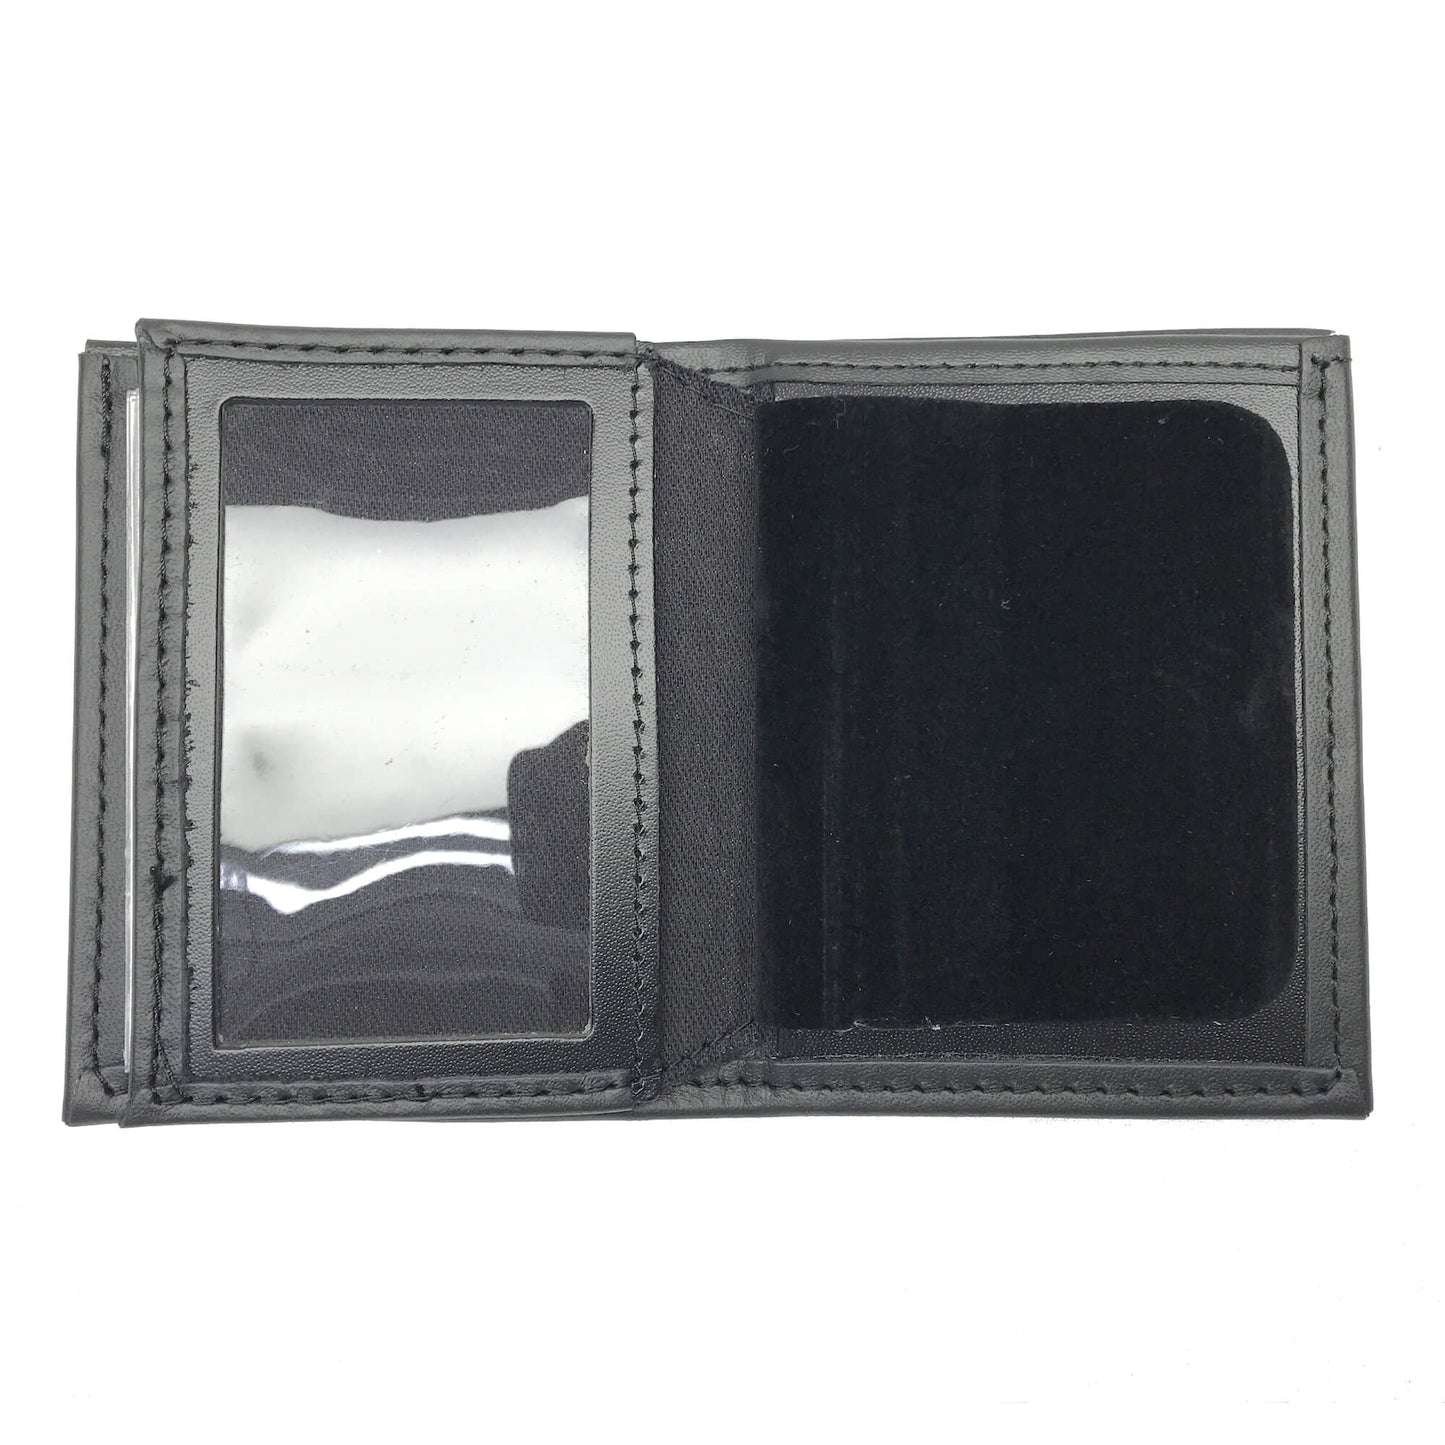 Albany Police Officer Bifold Hidden Badge Wallet-Perfect Fit-911 Duty Gear USA